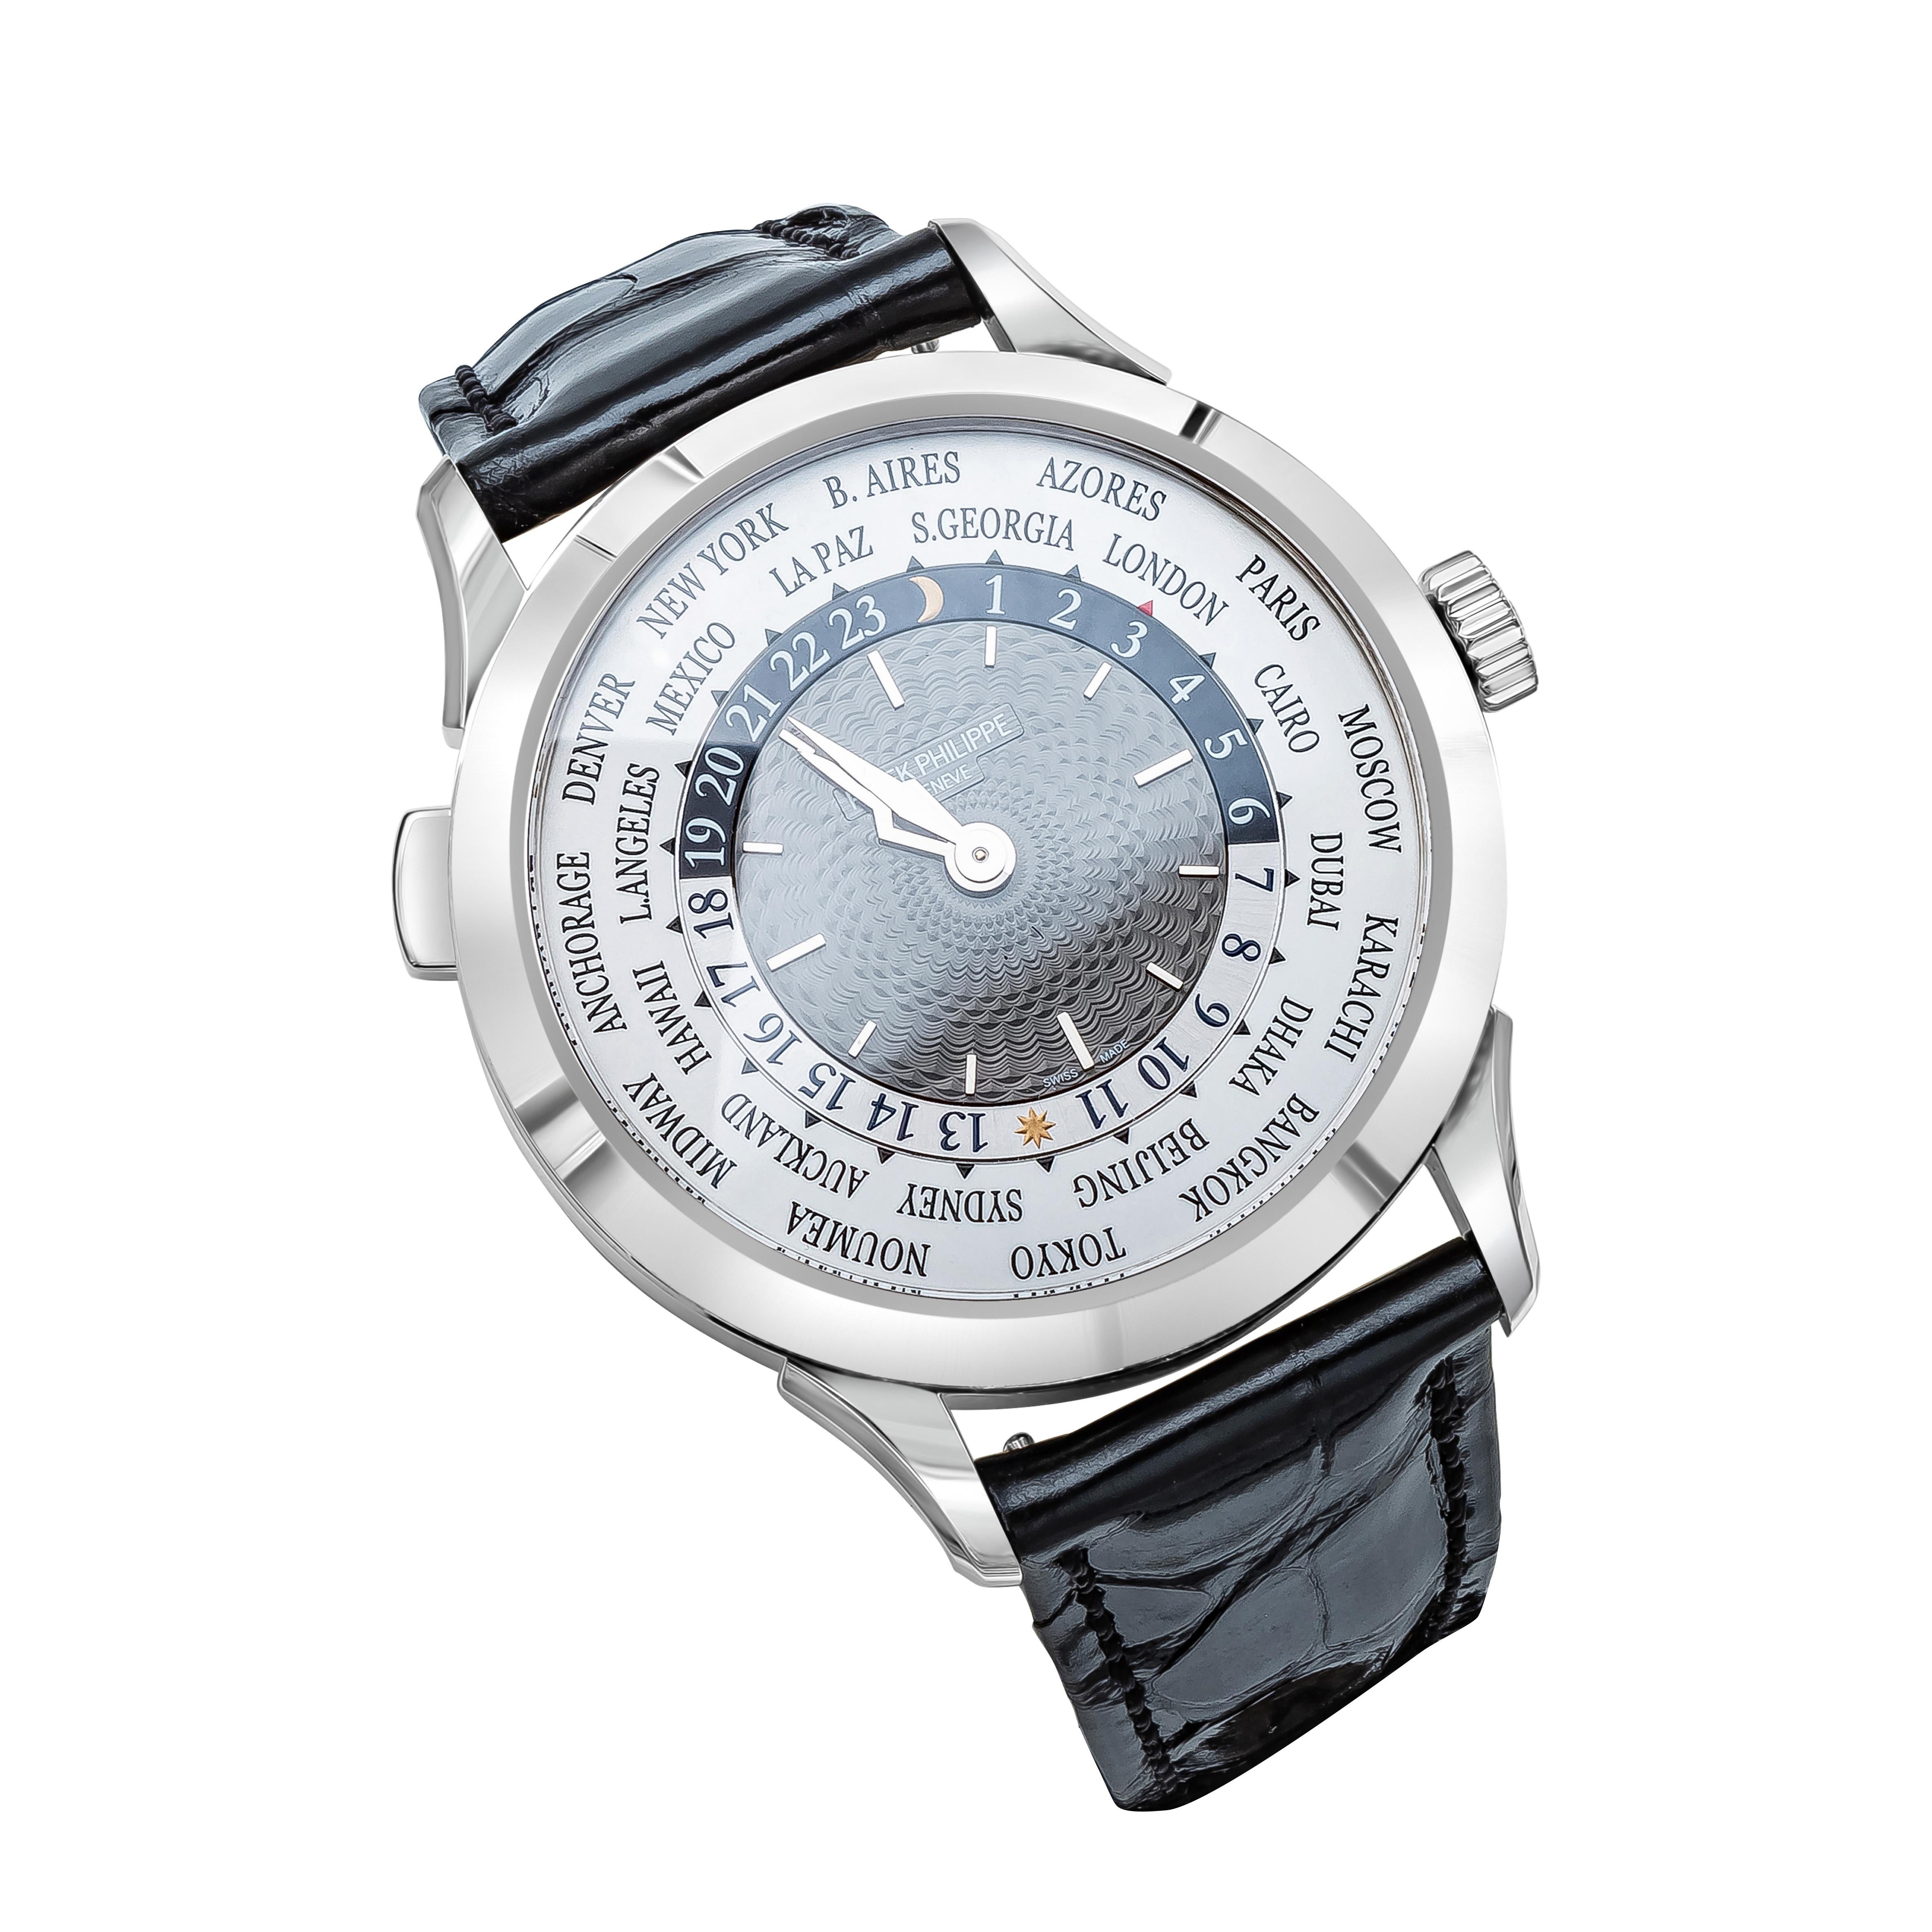 Patek Philippe Model 5230G World Time Complications. Manufactured in 2021.
18k White Gold, 39 millimeter case with sapphire crystal glass and case back.
Patek Philippe 240 HU movement with 33 jewels.
Grey guilloche dial with concentric chapter ring